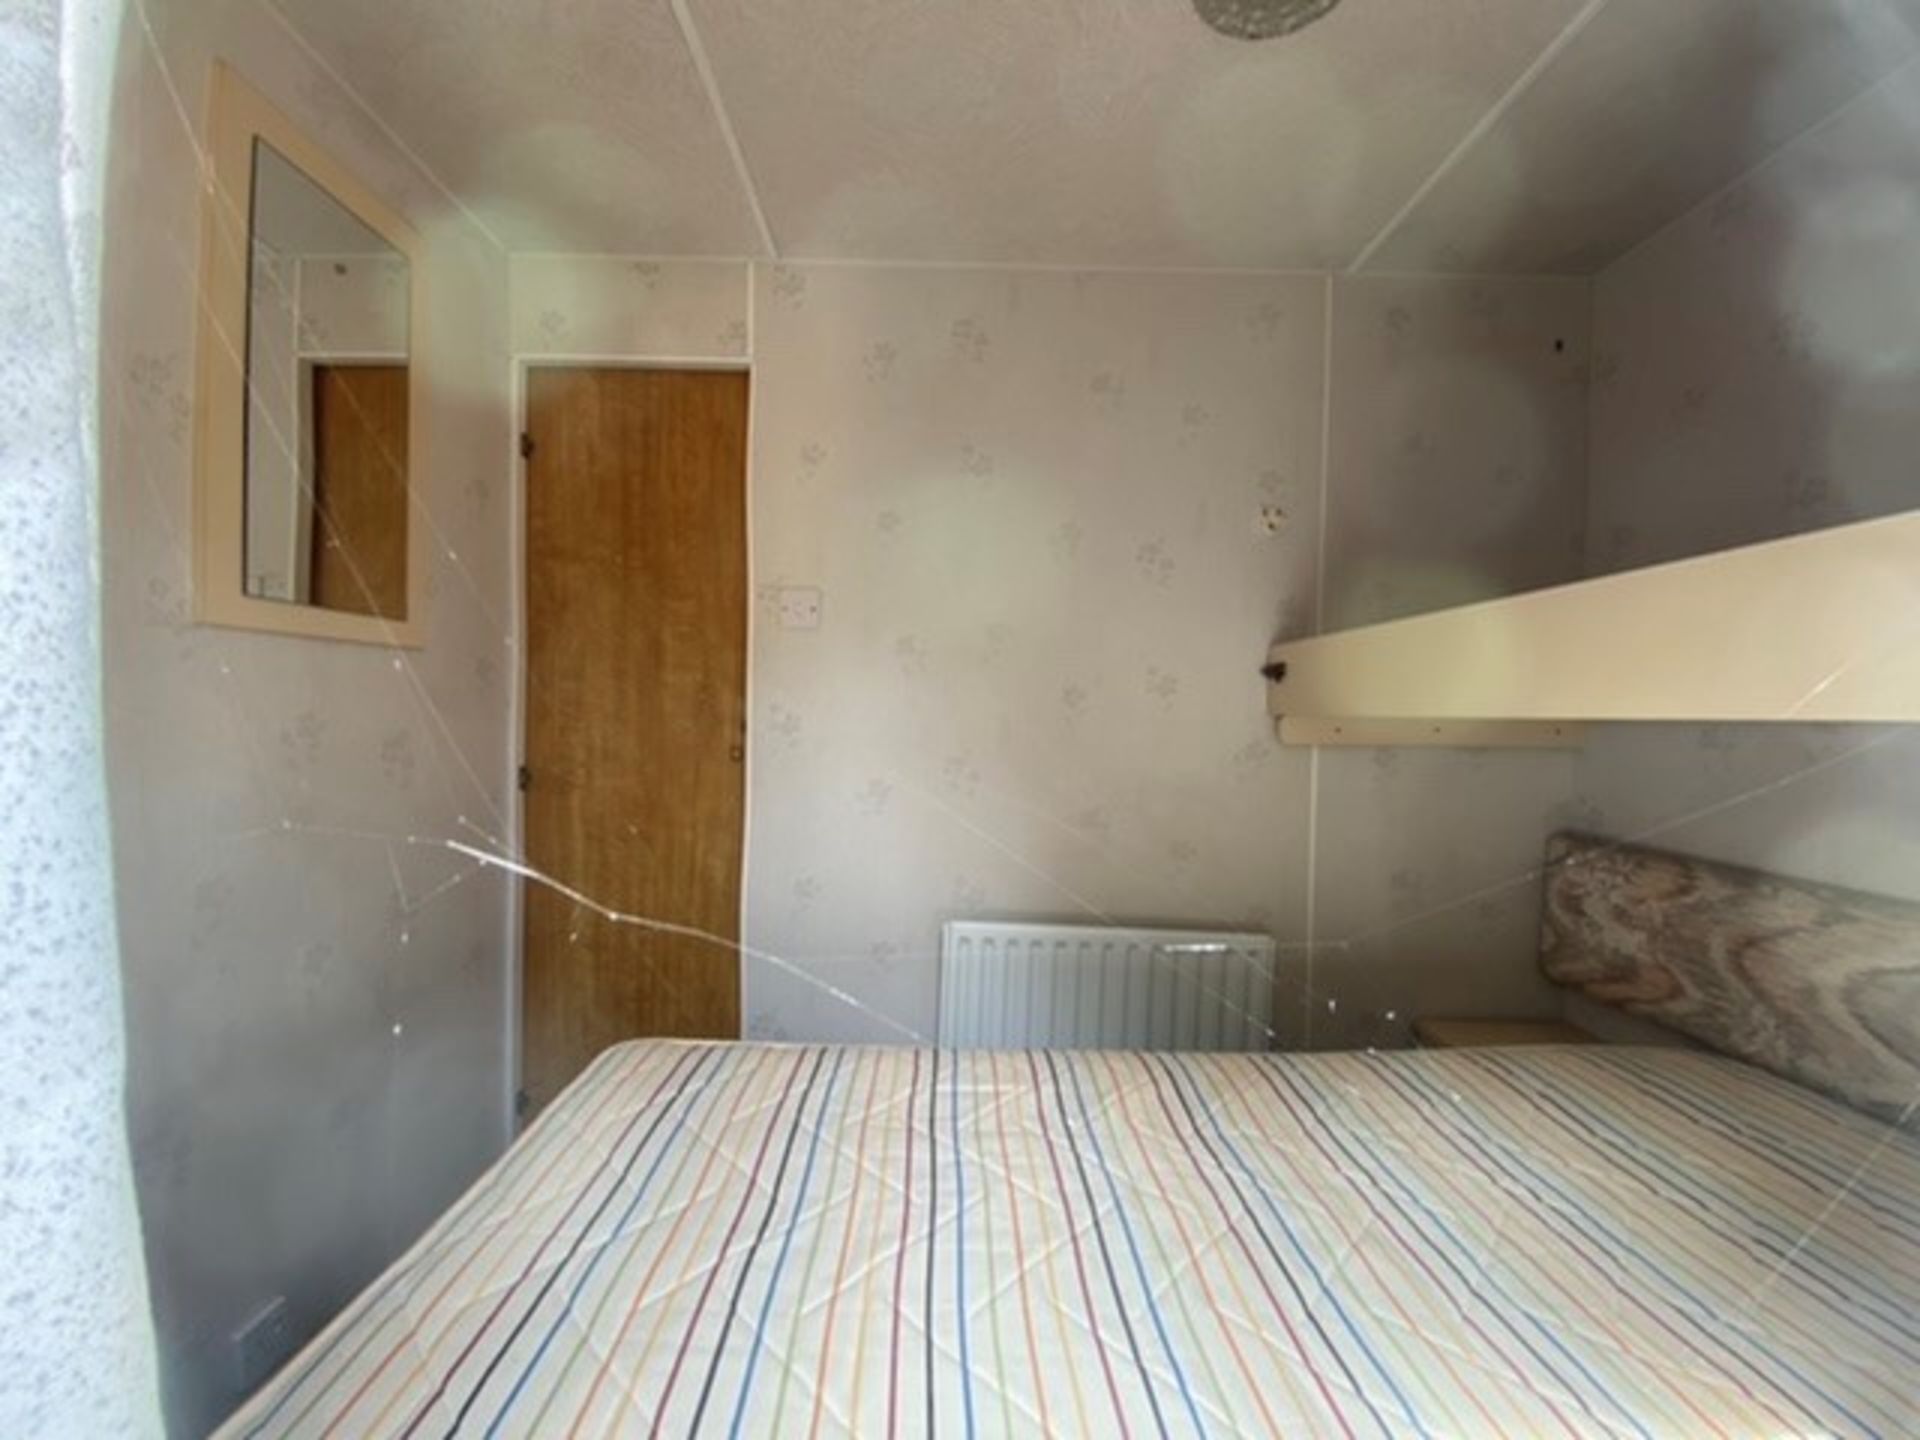 30x 10 GALAXY 2 BEDROOM STATIC CARAVAN WITH NEW GAS FIRED CENTRAL HEATING - Image 9 of 9